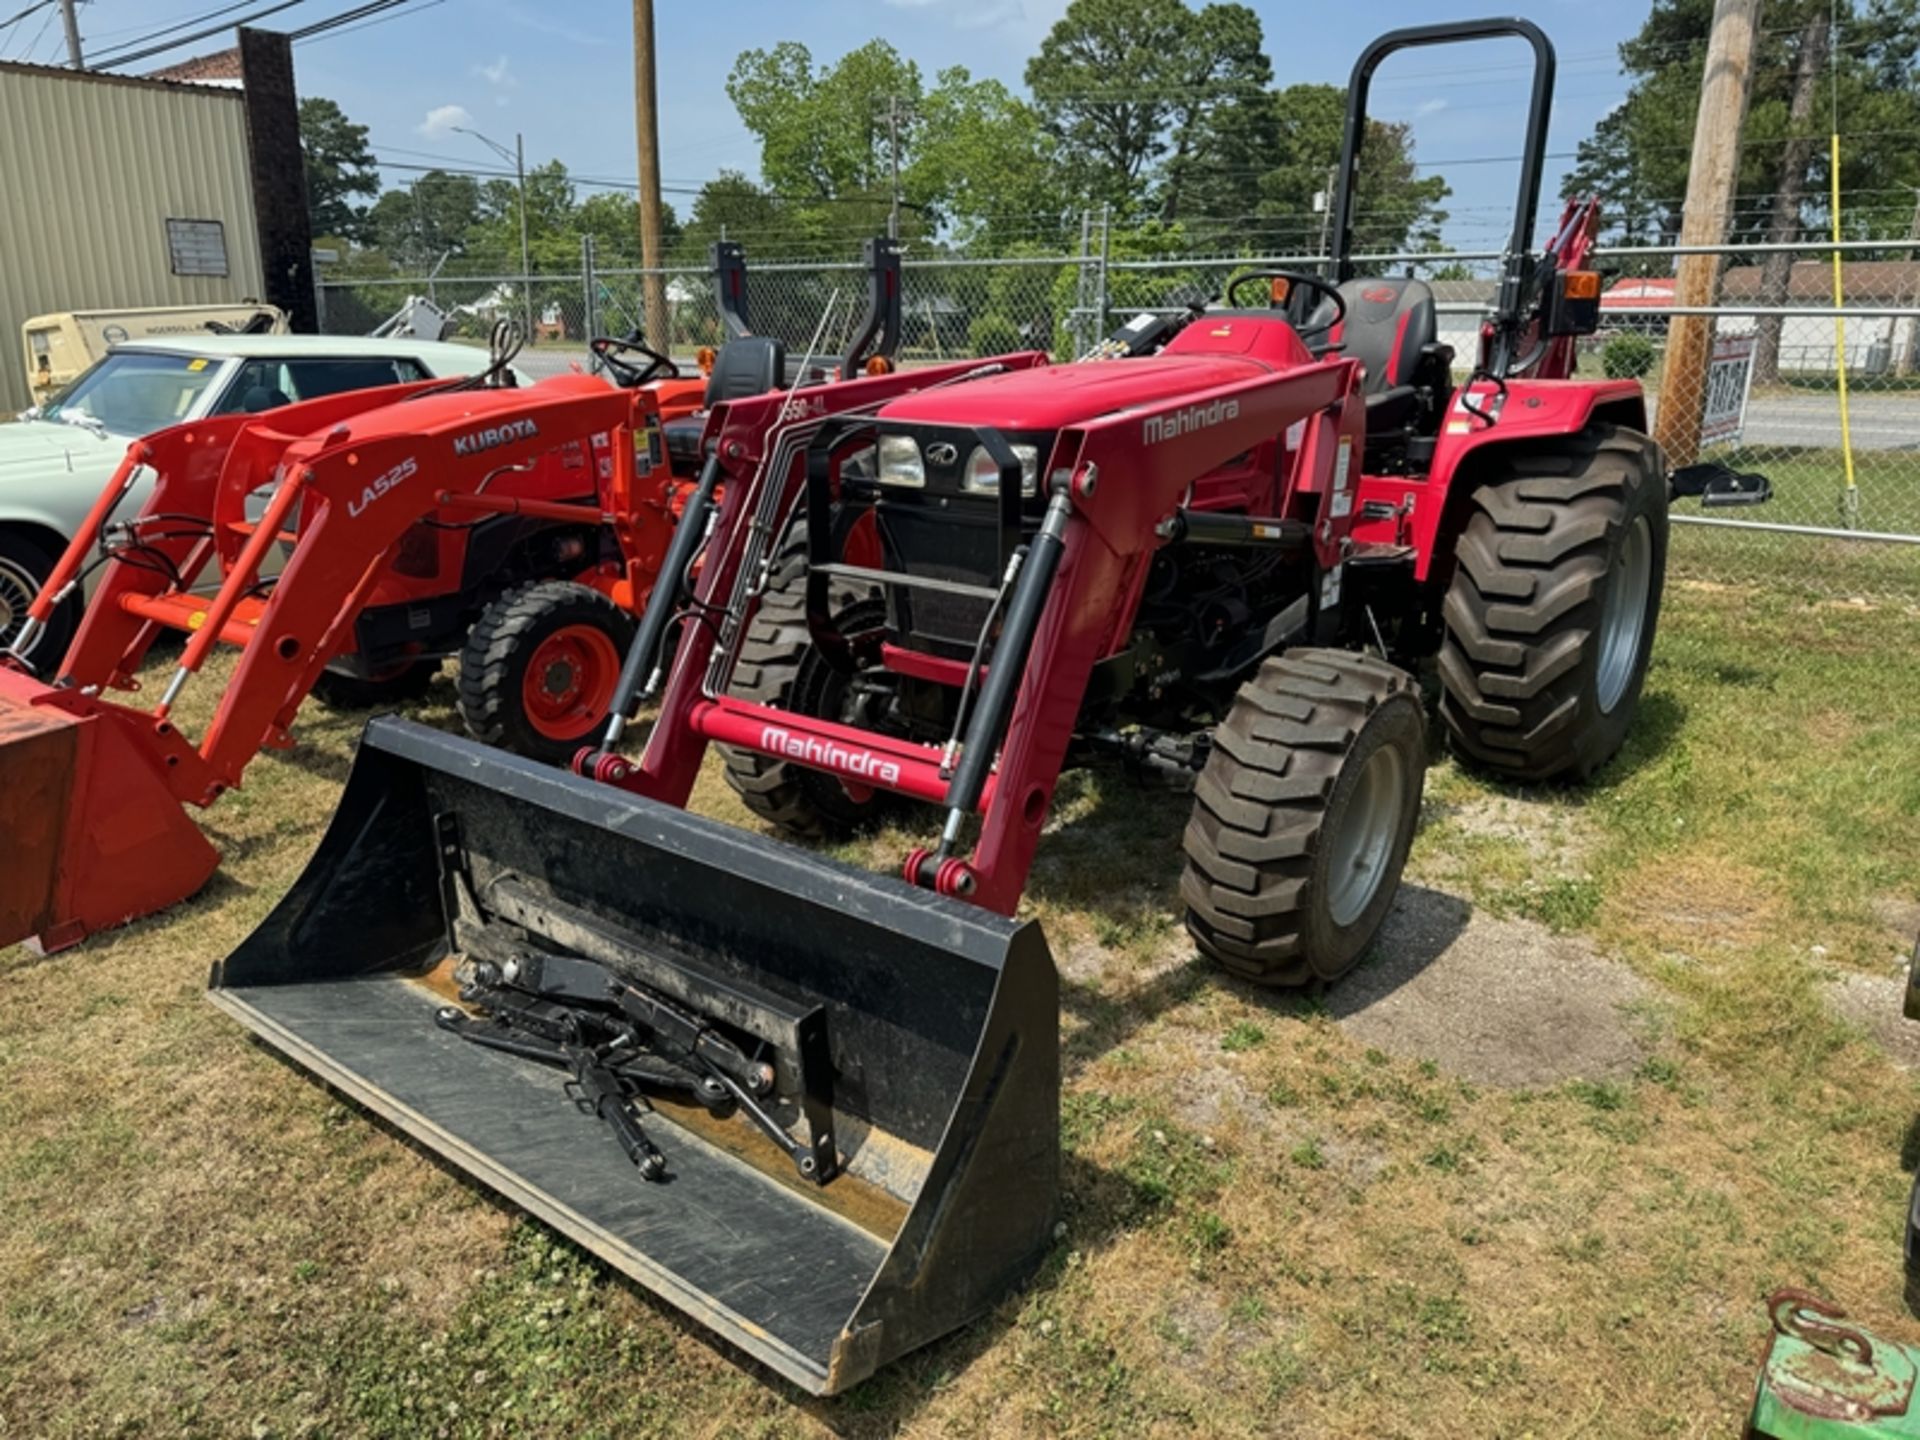 MAHINDRA 4550 with front end loader and 4550B backhoe, 4wd - 26 hours showing